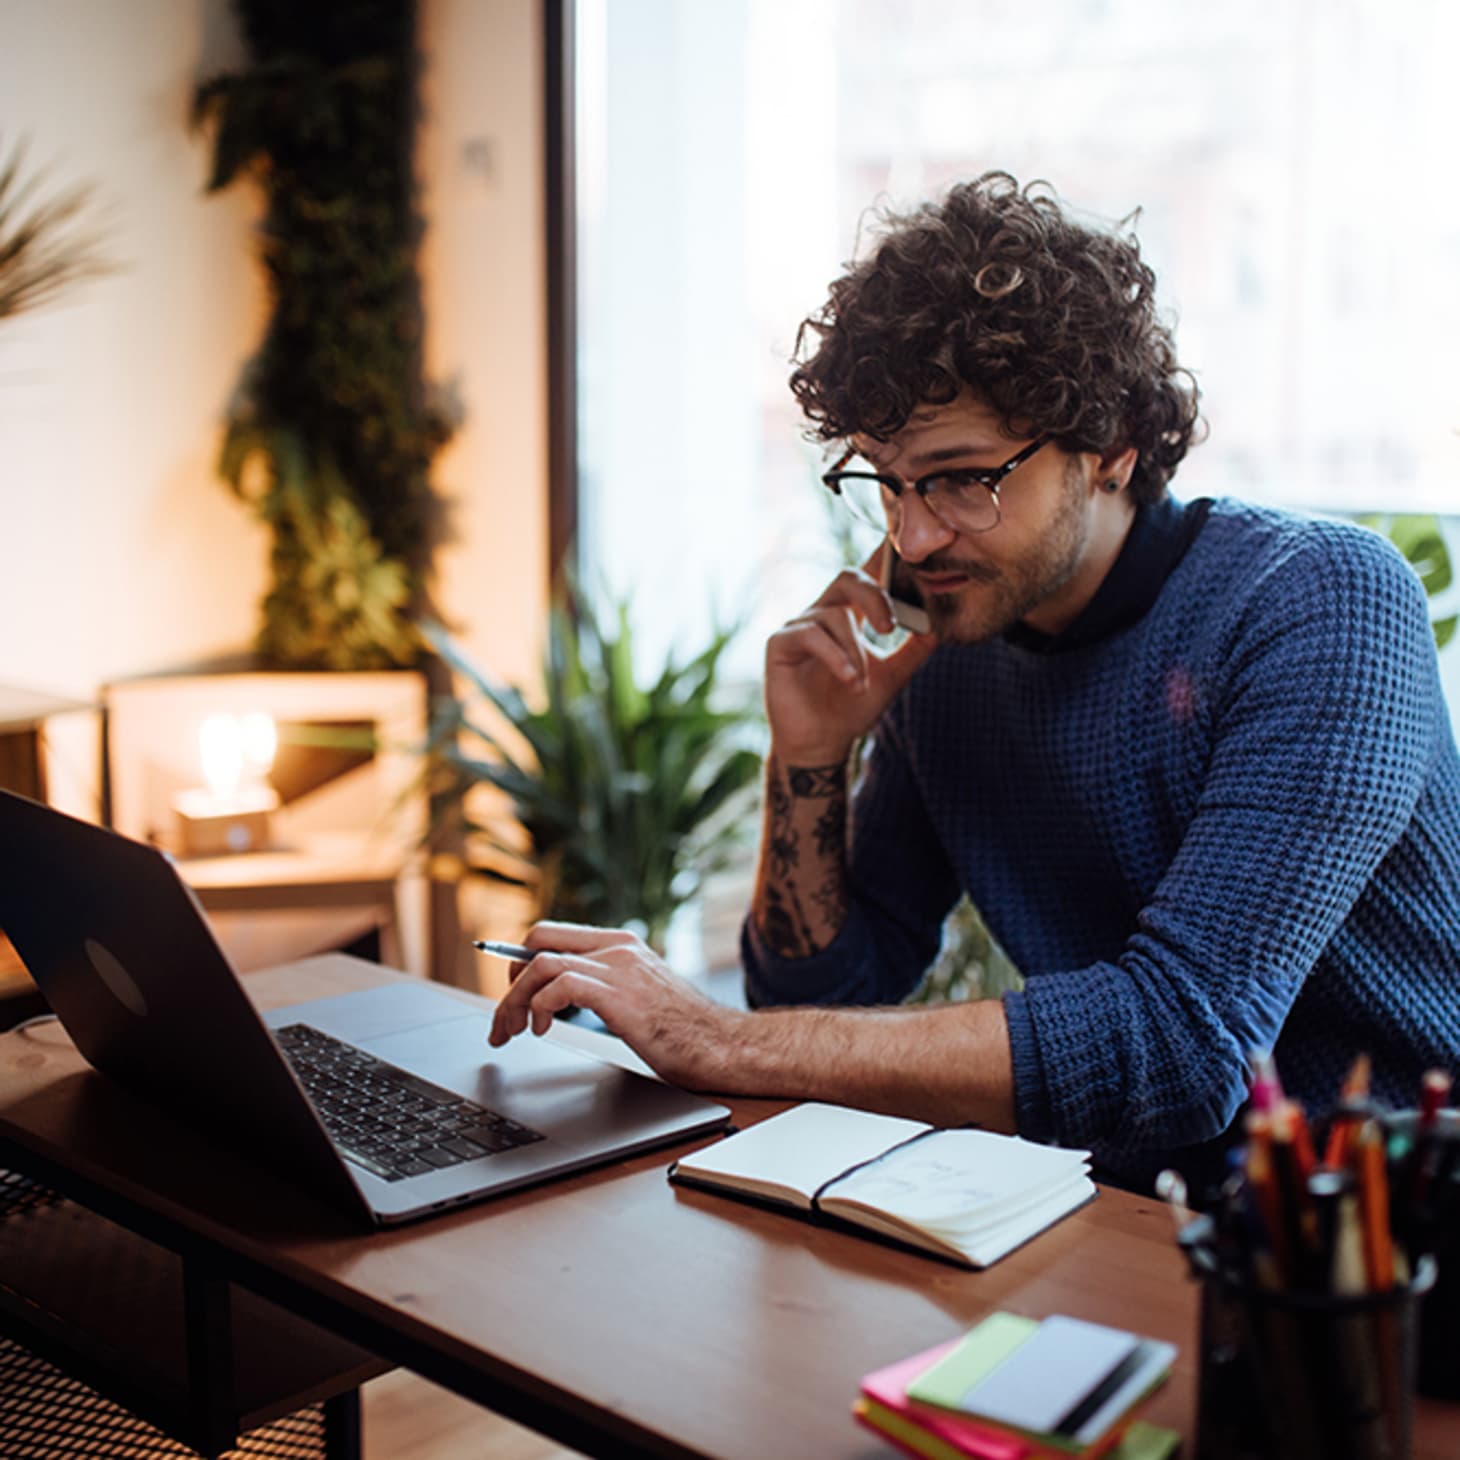 man with curly hair talking on phone while at home office